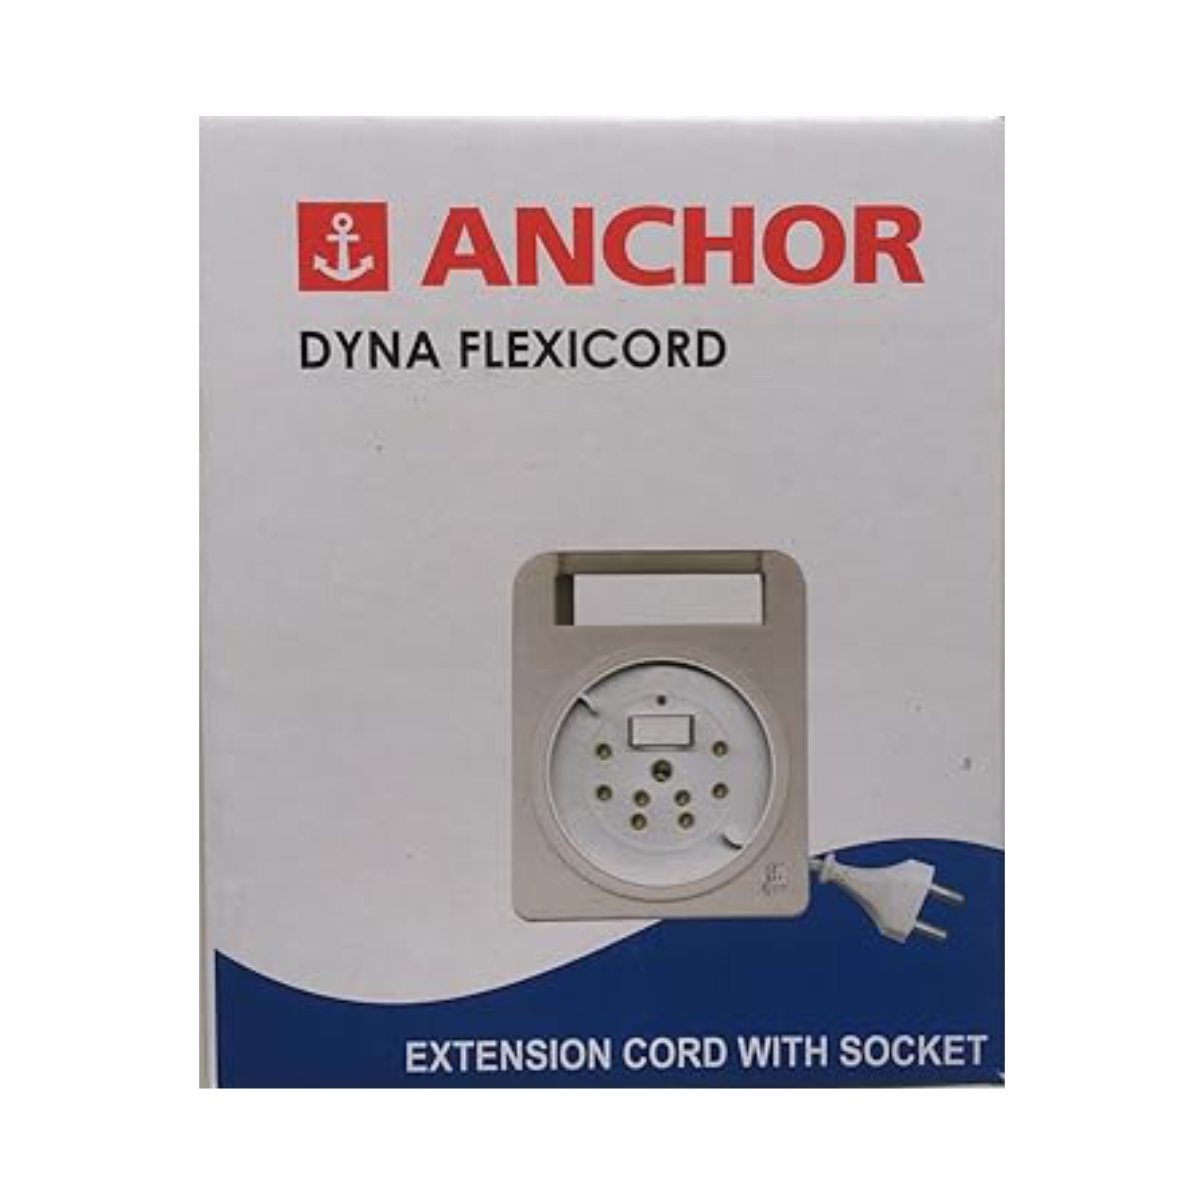 ANCHOR Dyna Flexicord 15380 3 Socket Extension Boards (White, 8 m)